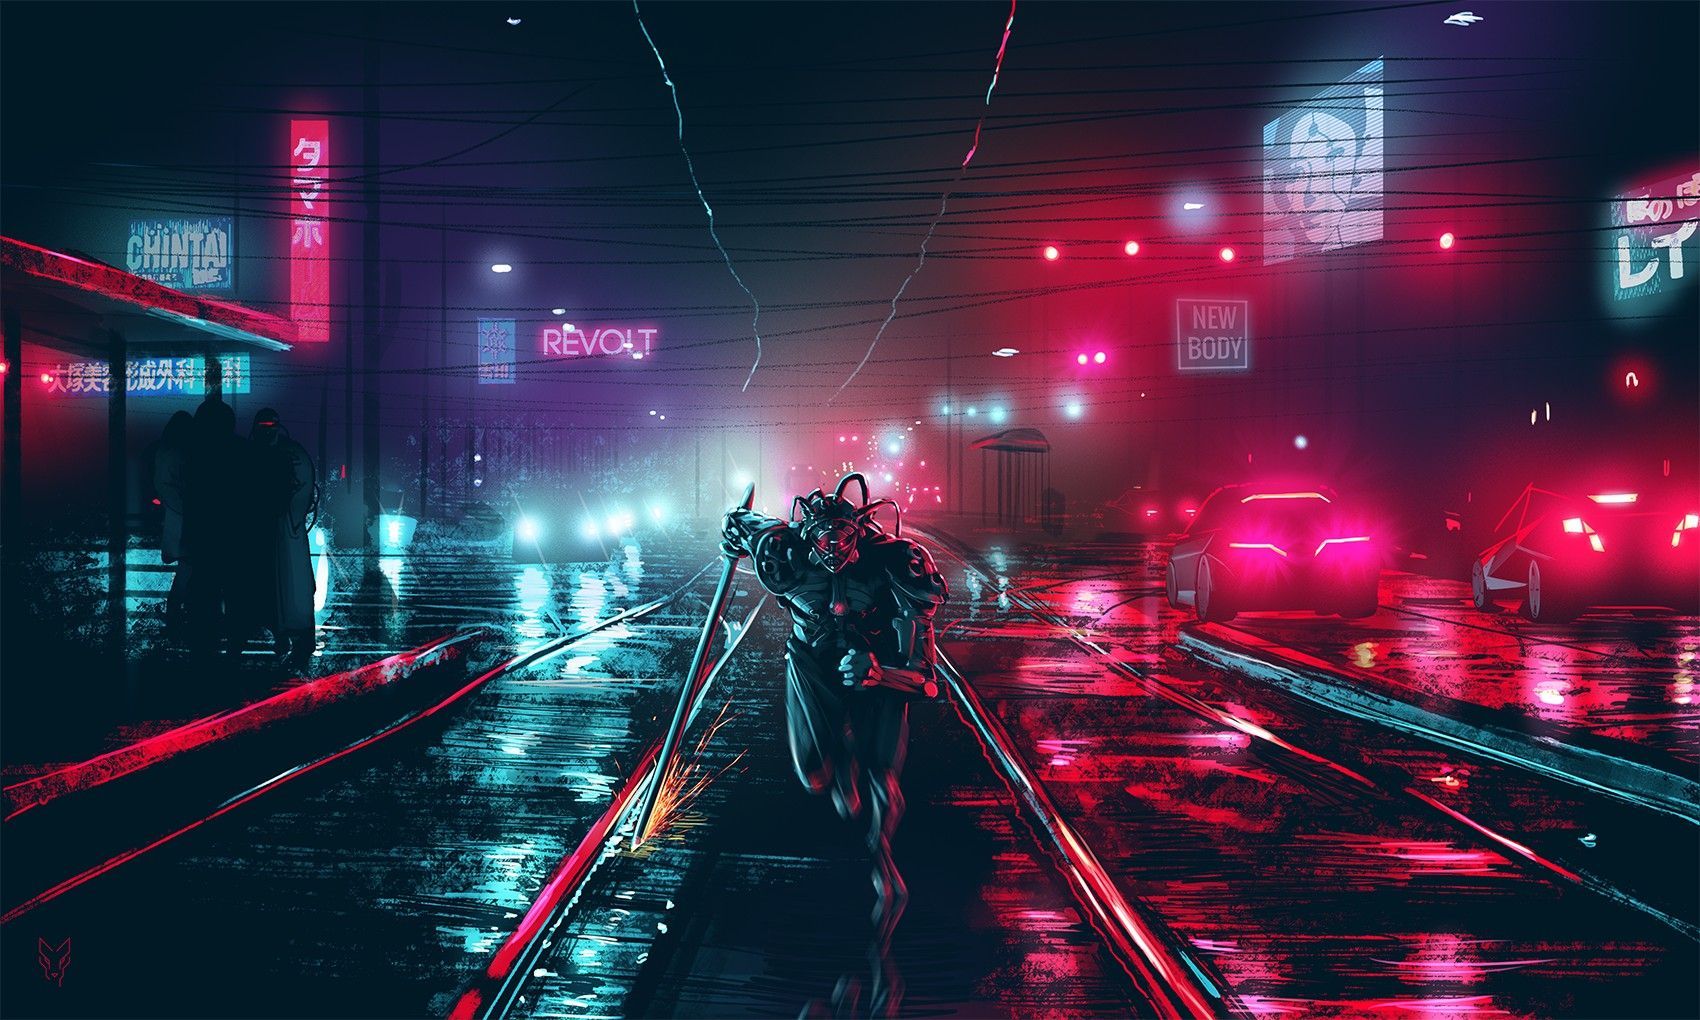 Cyberpunk Neon Girl Digital Art Wallpaper,HD Artist Wallpapers,4k Wallpapers ,Images,Backgrounds,Photos and Pictures